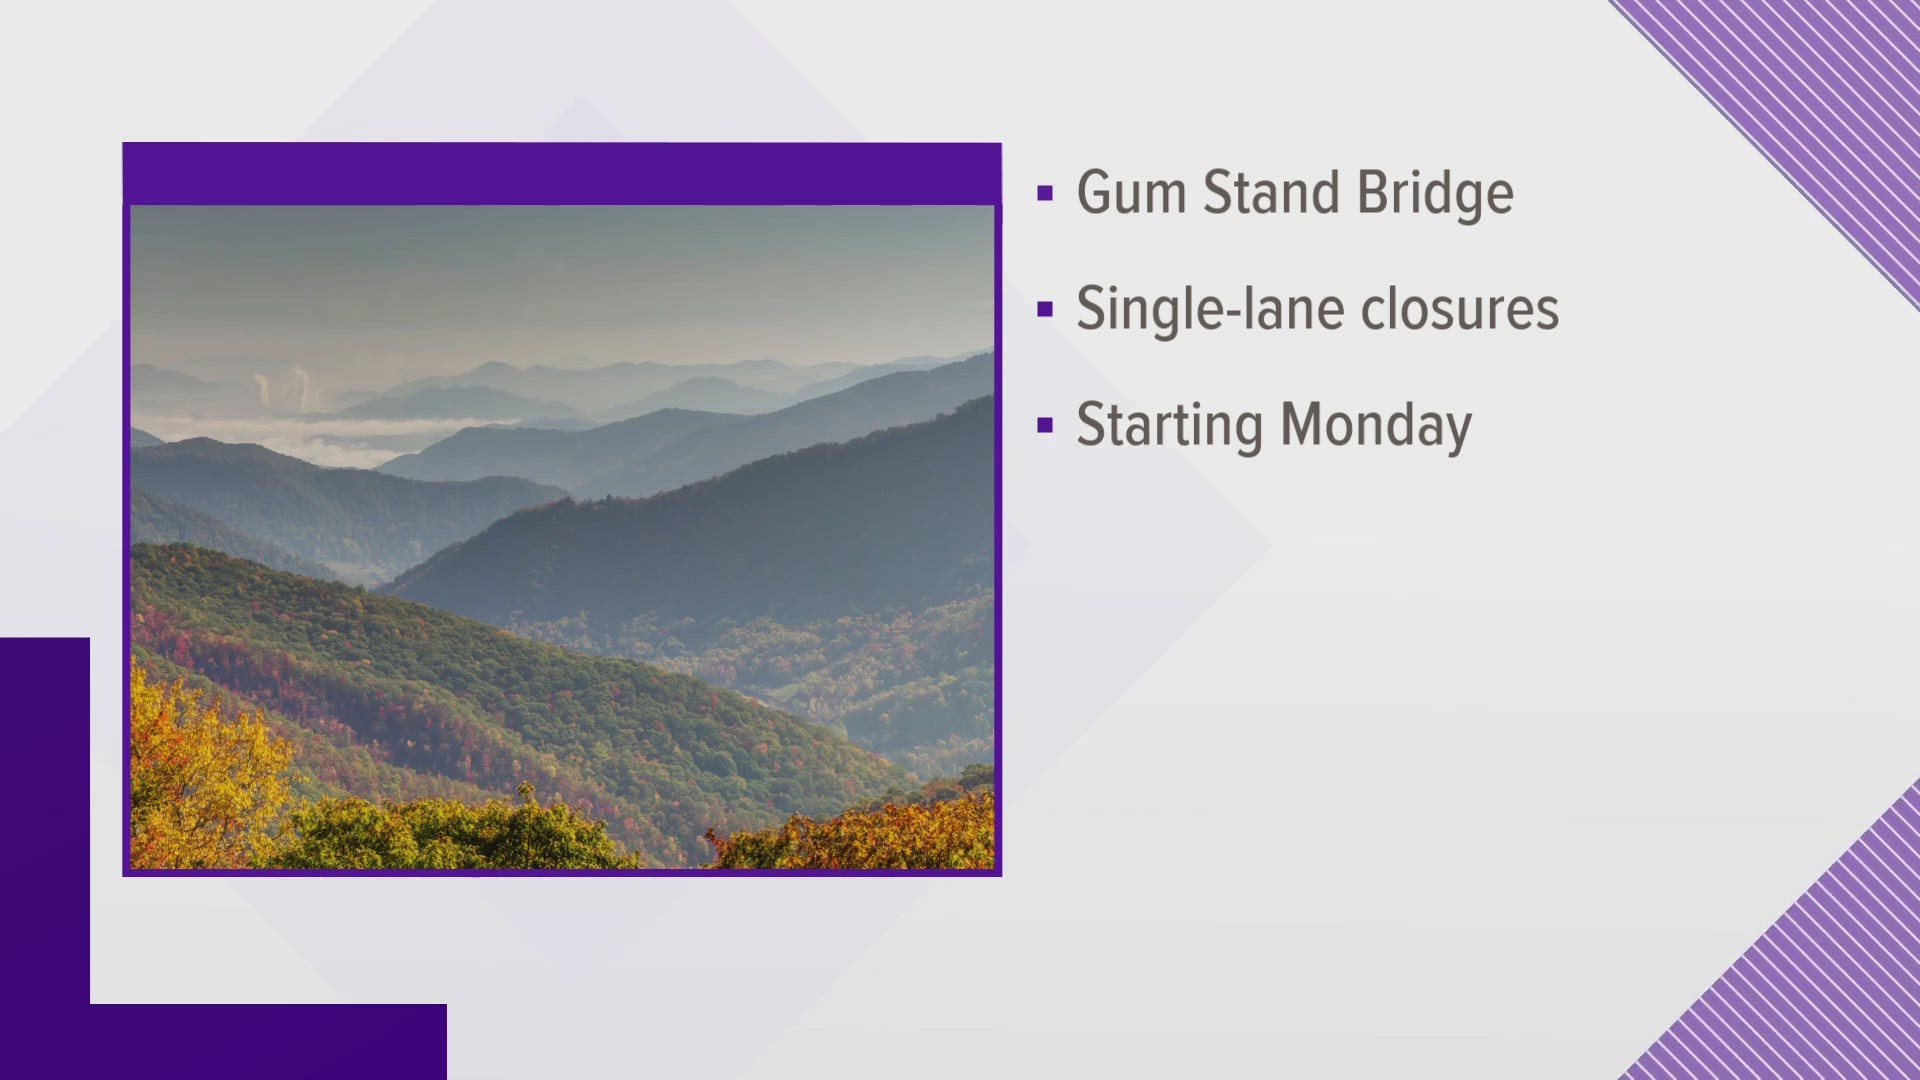 Great Smoky Mountains National Park officials announced some single-lane closures at Gum Stand Bridge, located between the northbound and southbound Spur.